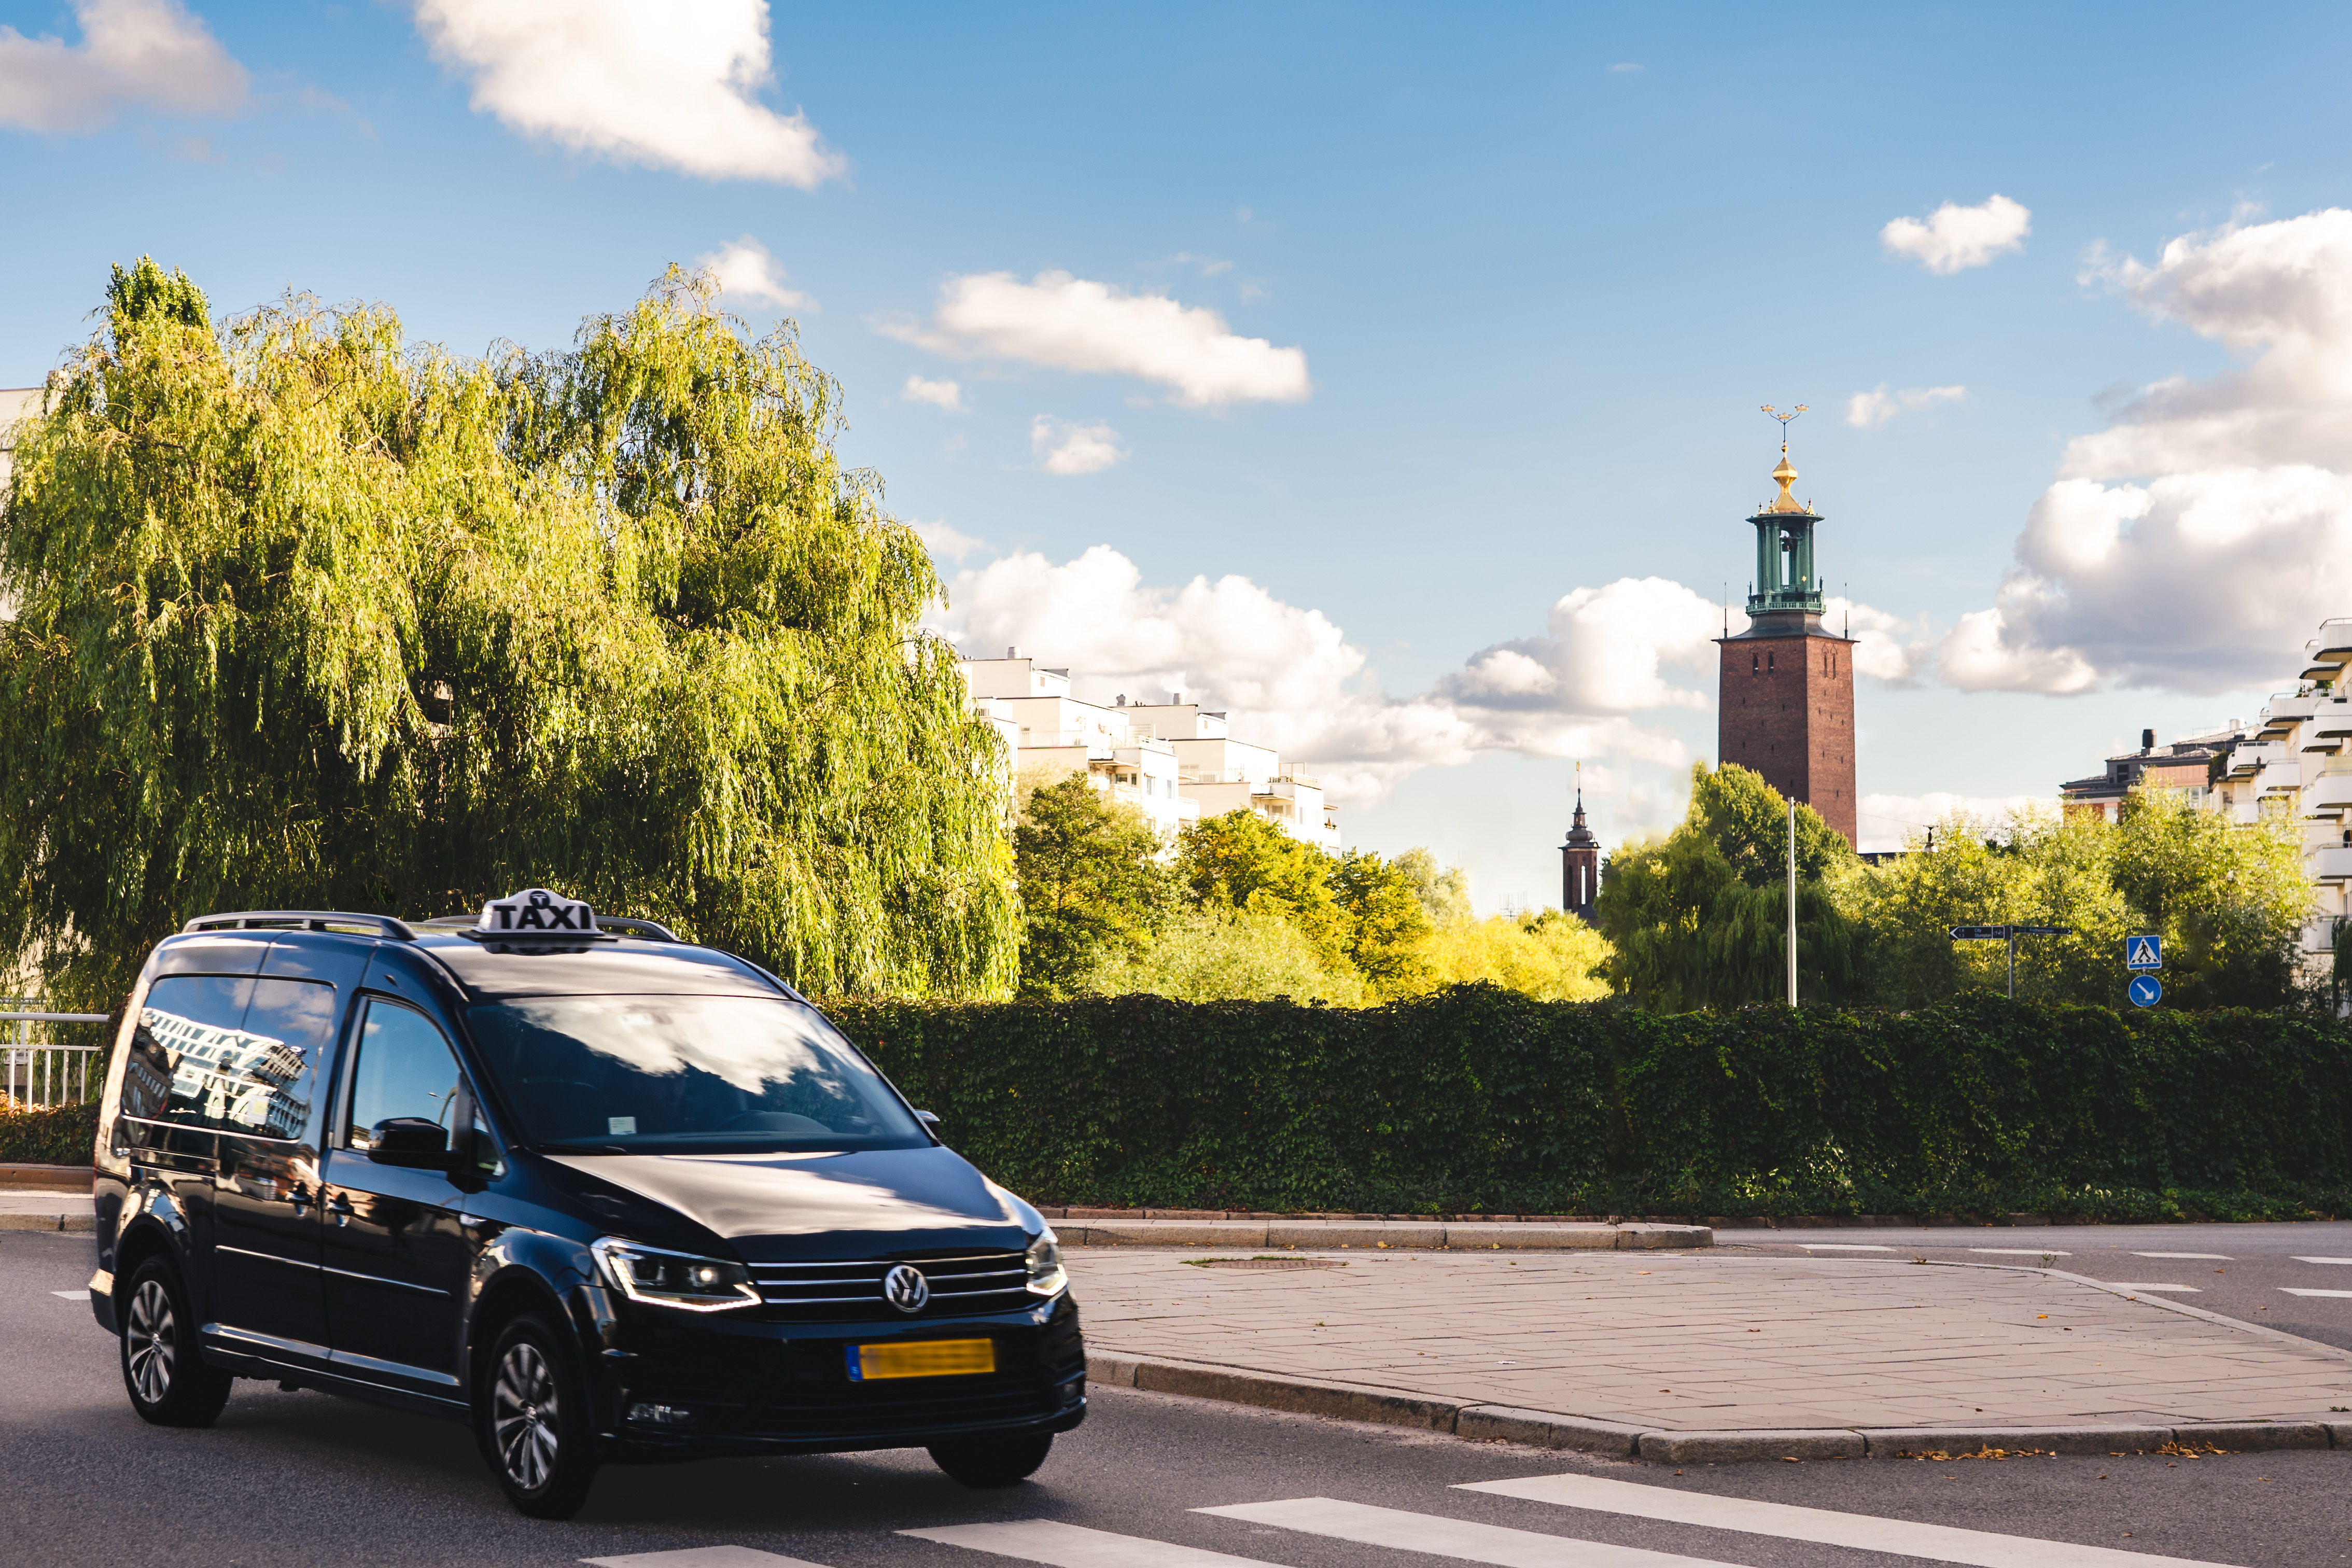  Taxifly Schiphol Taxi Meppel Luchthavenvervoer  thumbnail